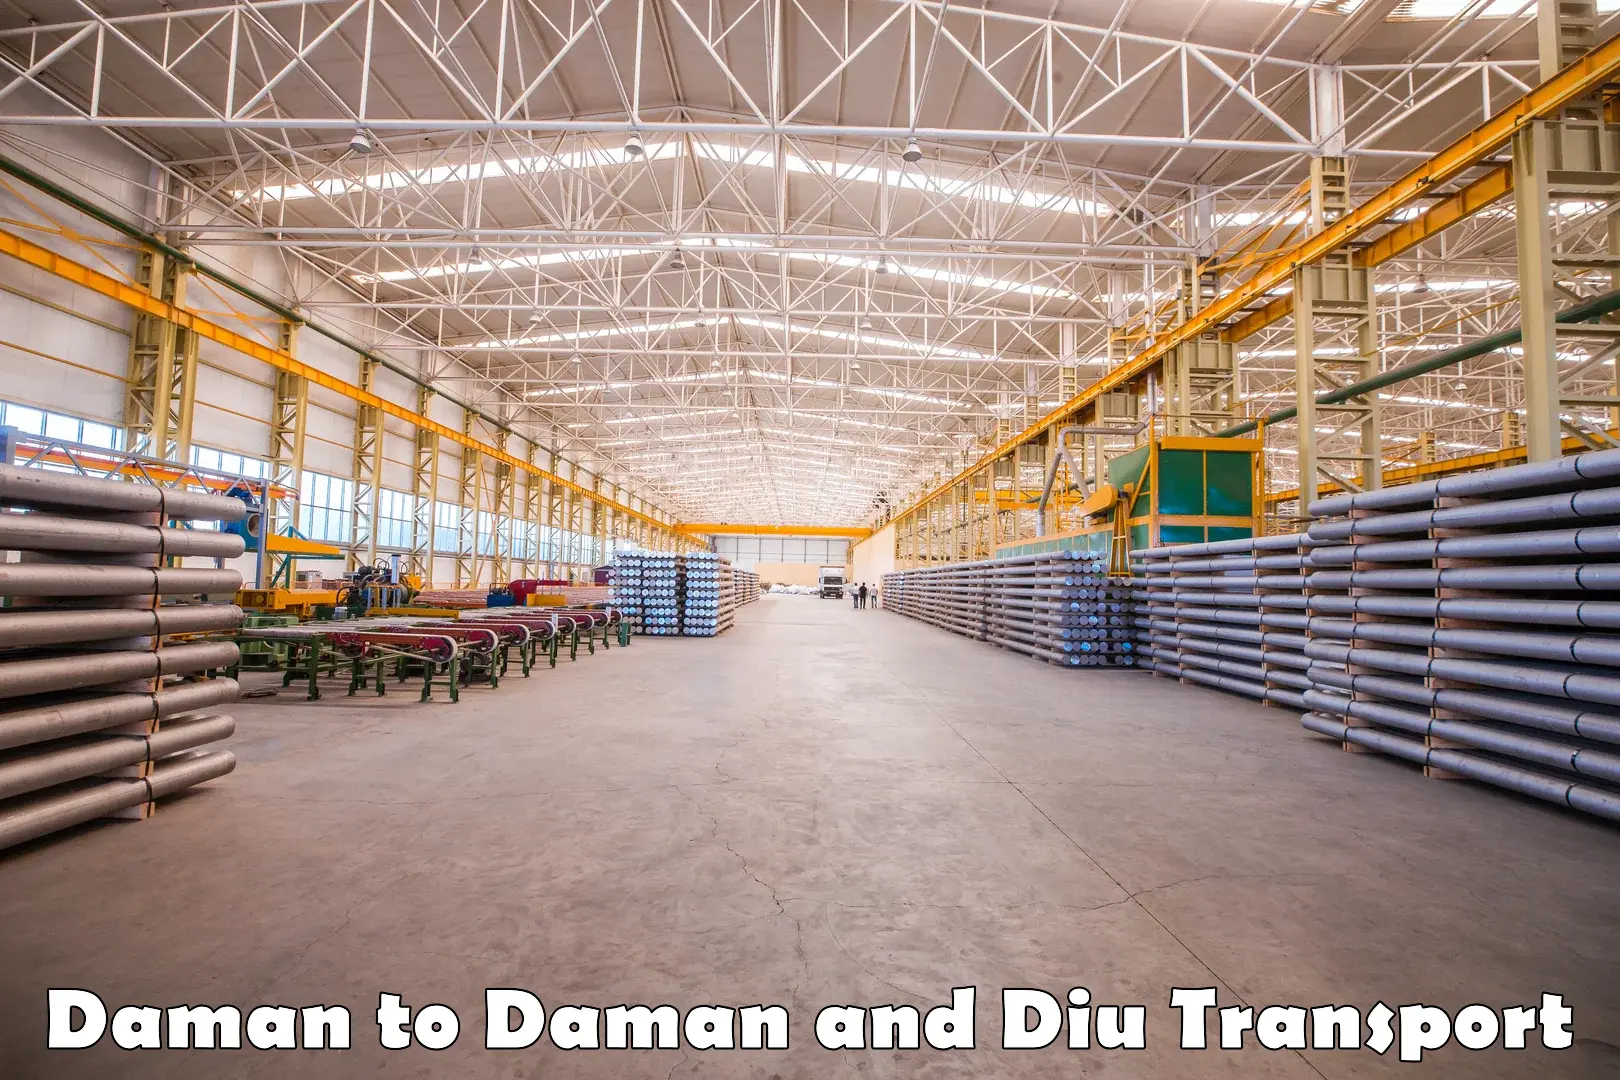 Transport bike from one state to another Daman to Diu